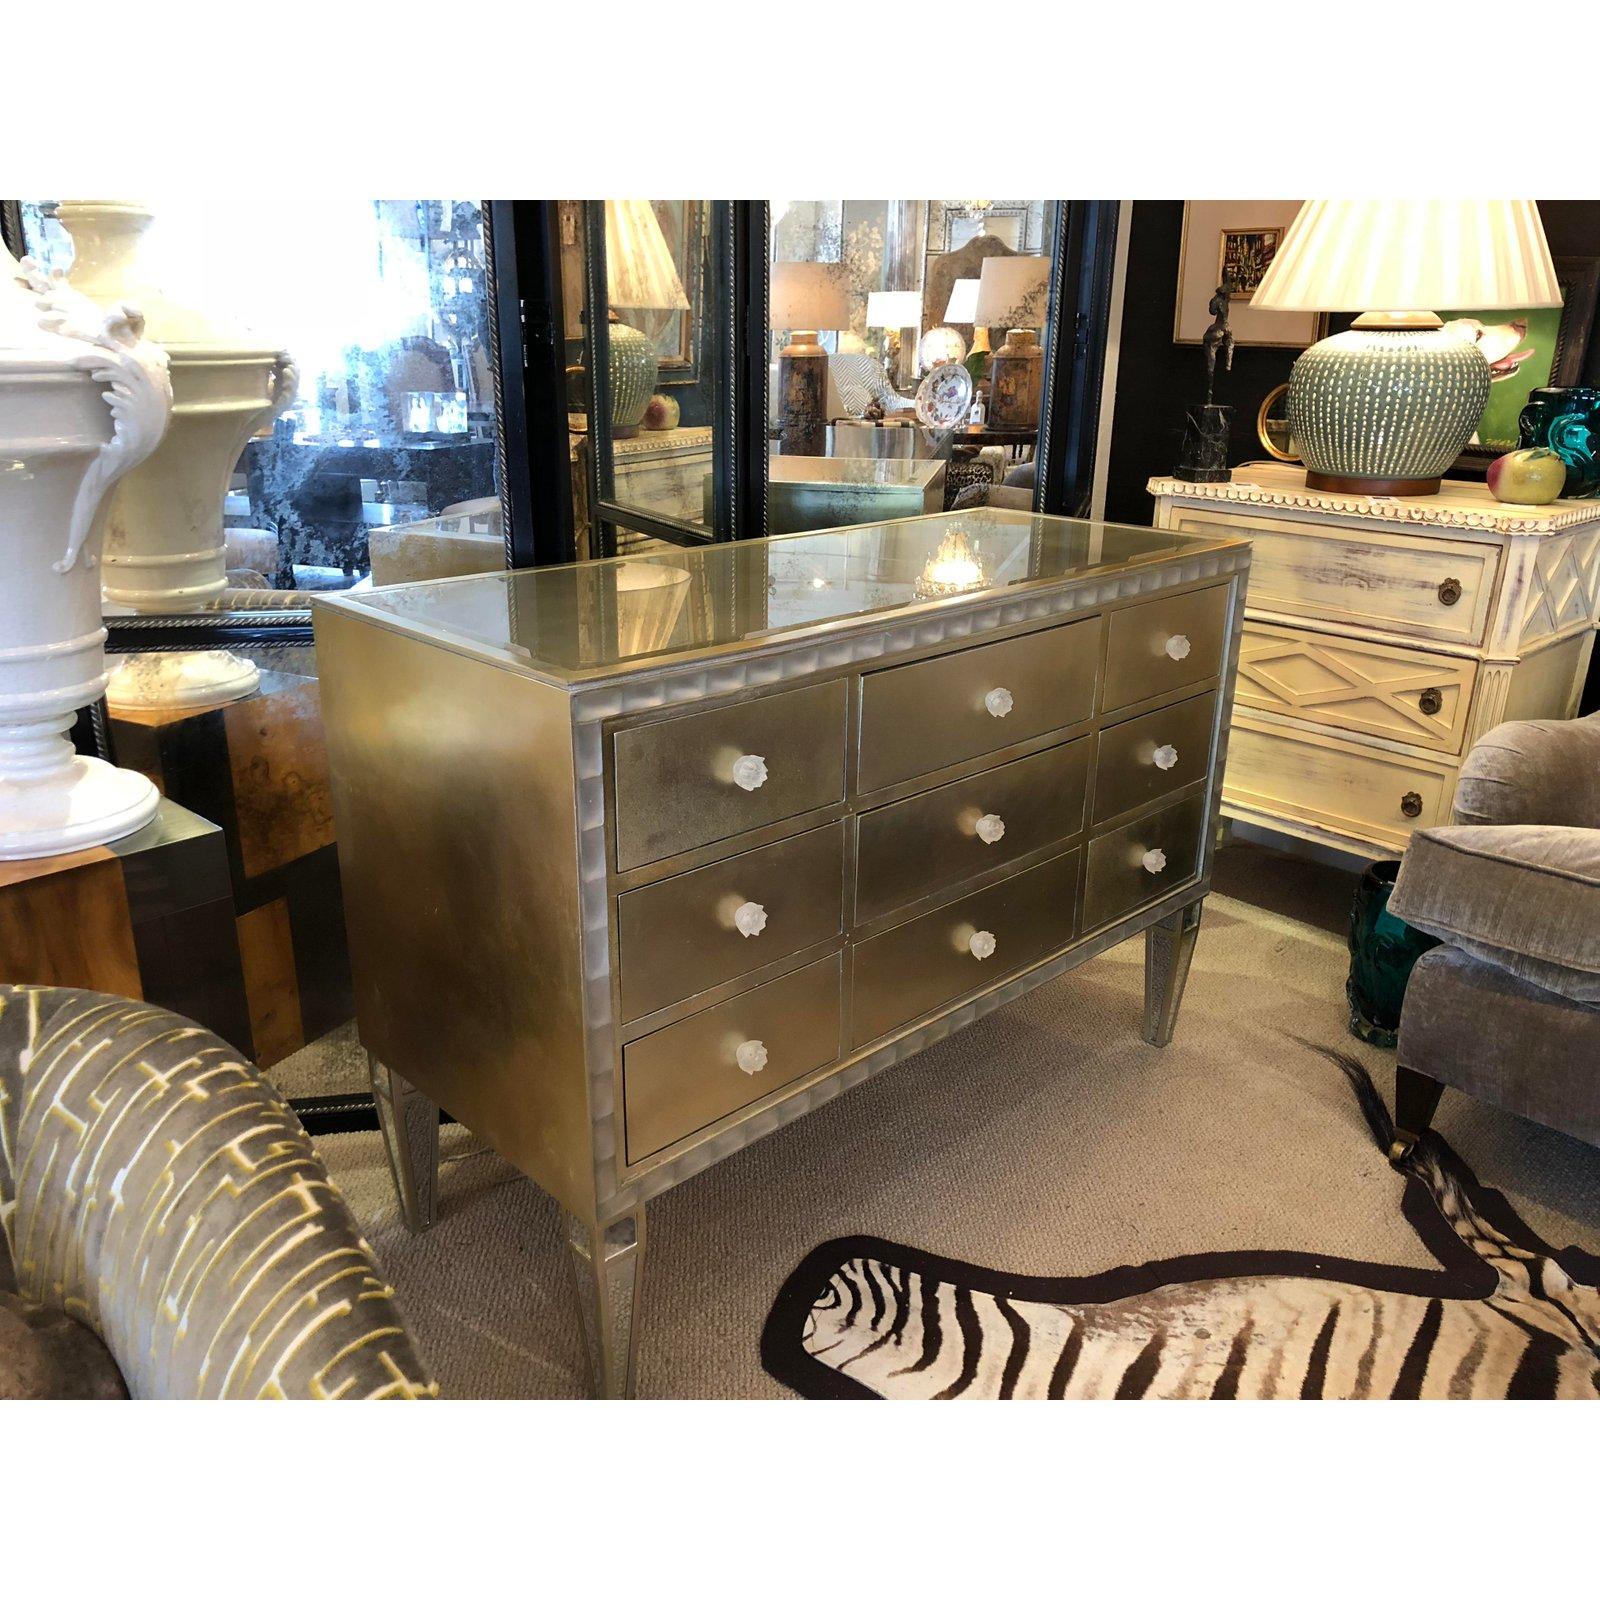 Glamorous custom made Hollywood Regency style chest in a gilt and silvered finish. Chest has a molded acrylic trim surround and molded flower drawer pulls that look like Lalique. Top is inset gilt colored beveled glass and each drawer is lined in